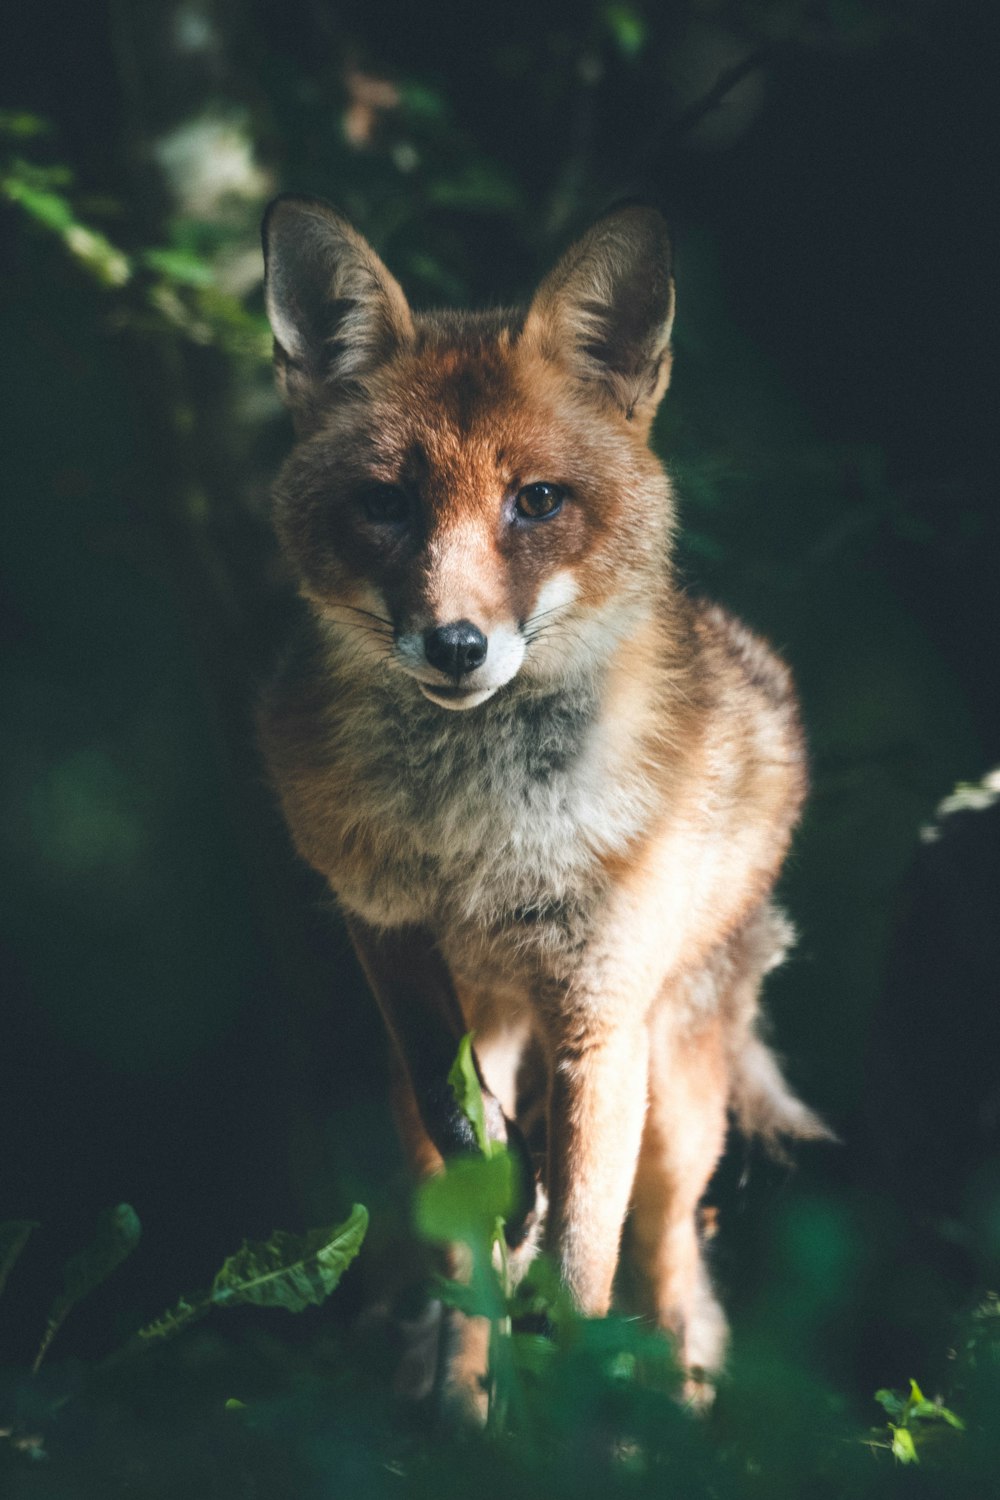 a close up of a small fox in a forest